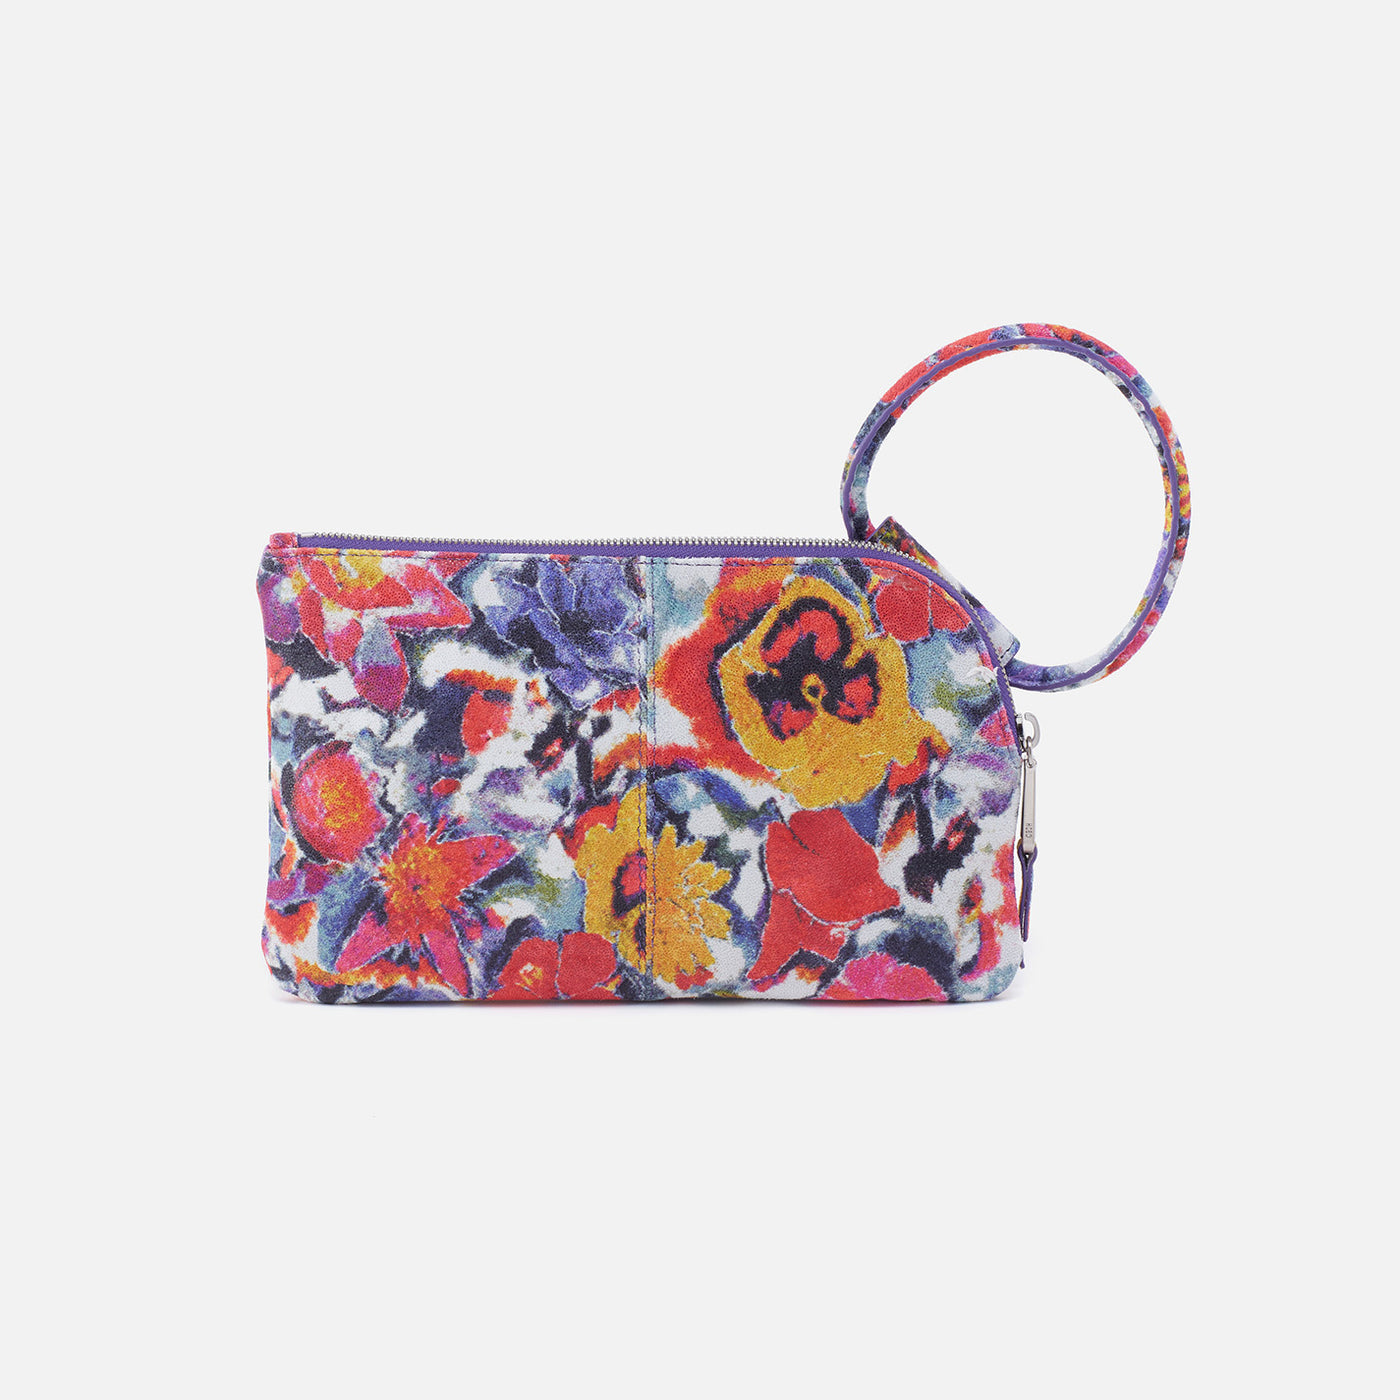 Sable Wristlet in Printed Leather - Poppy Floral